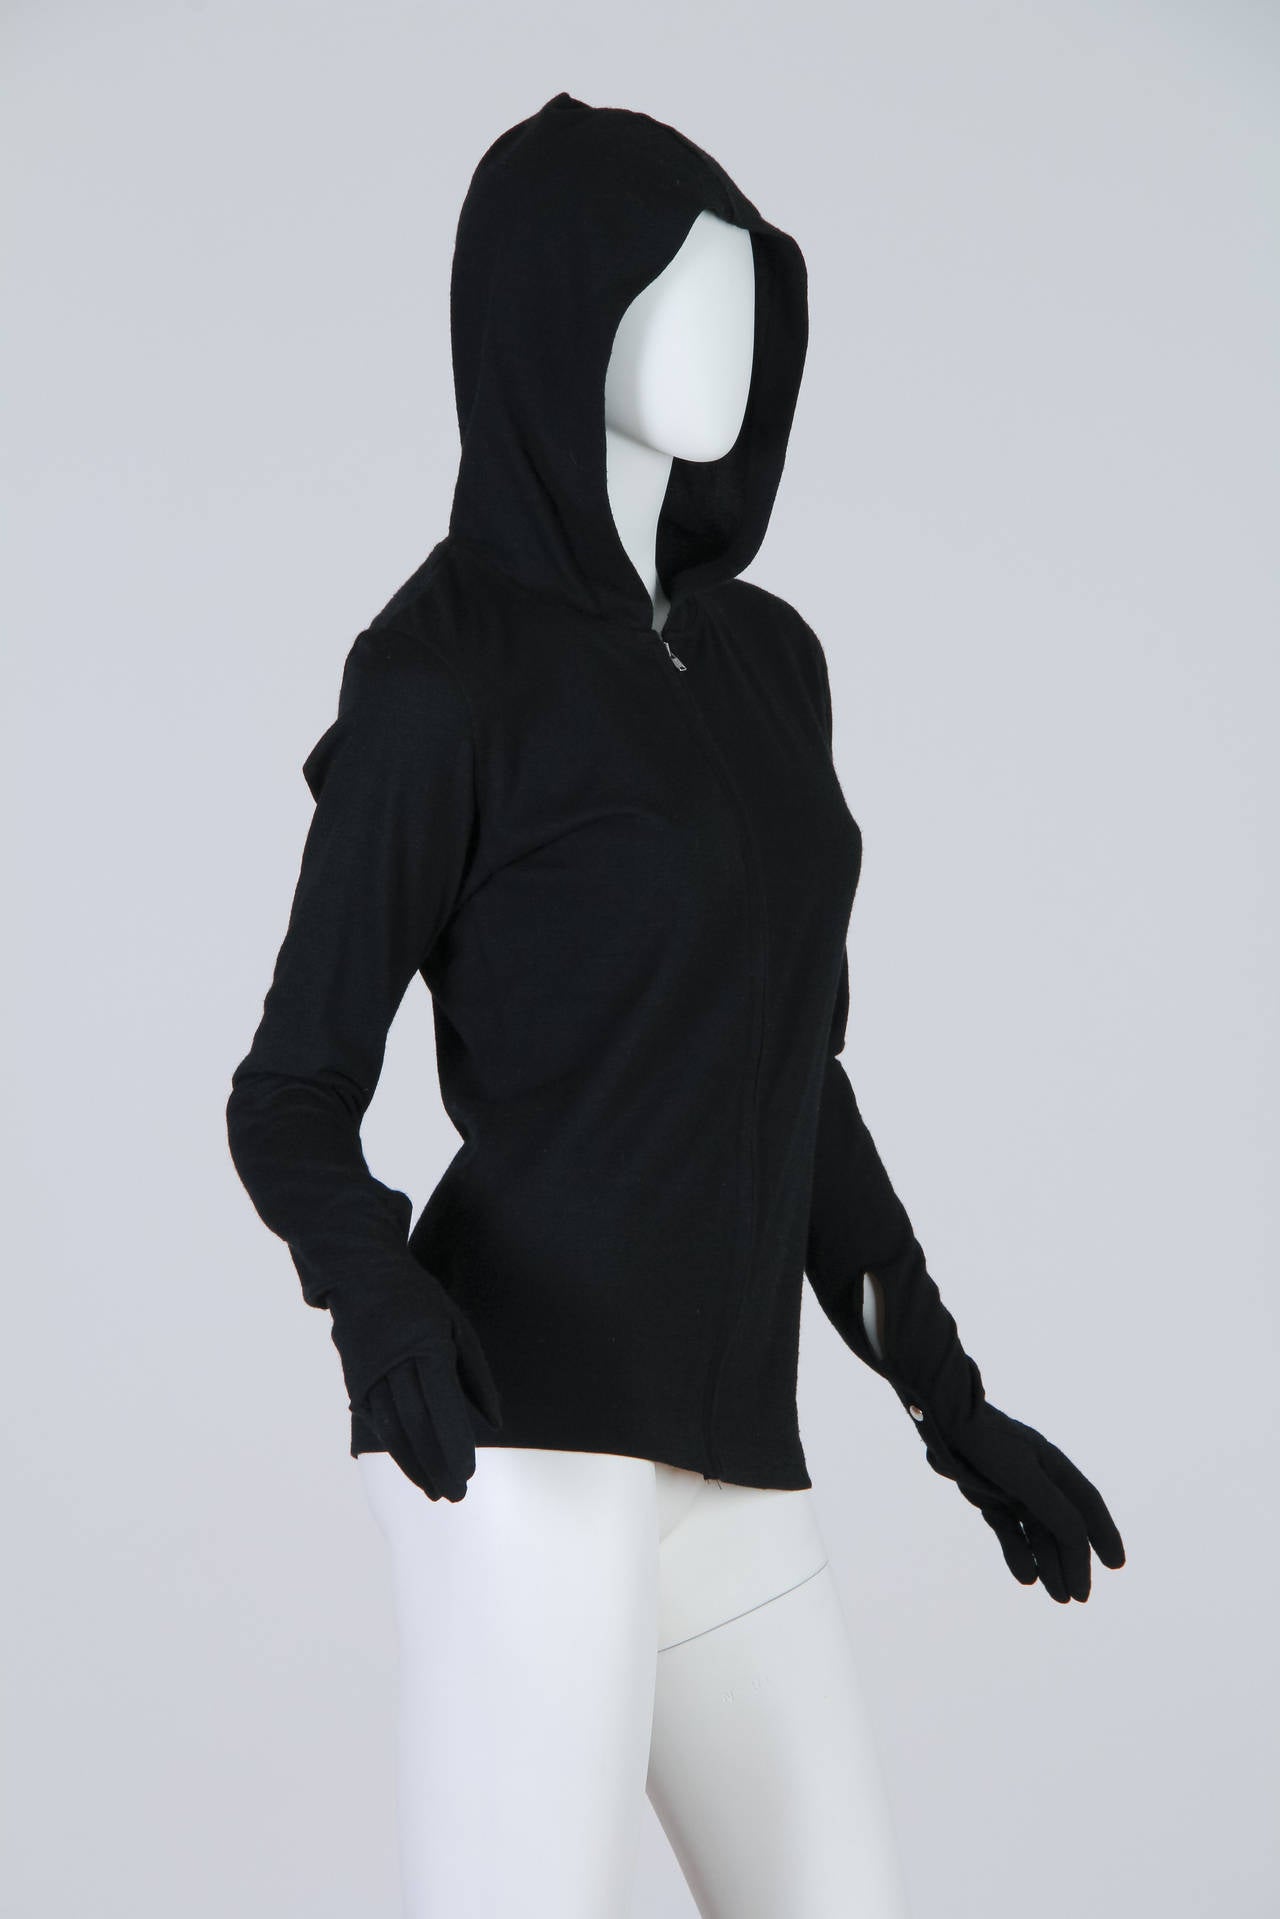 Killer cool in one easy piece from Comme des Garcons. A staple for any collector. The gloves are attached to the ends of the sleeves for a seamless look.